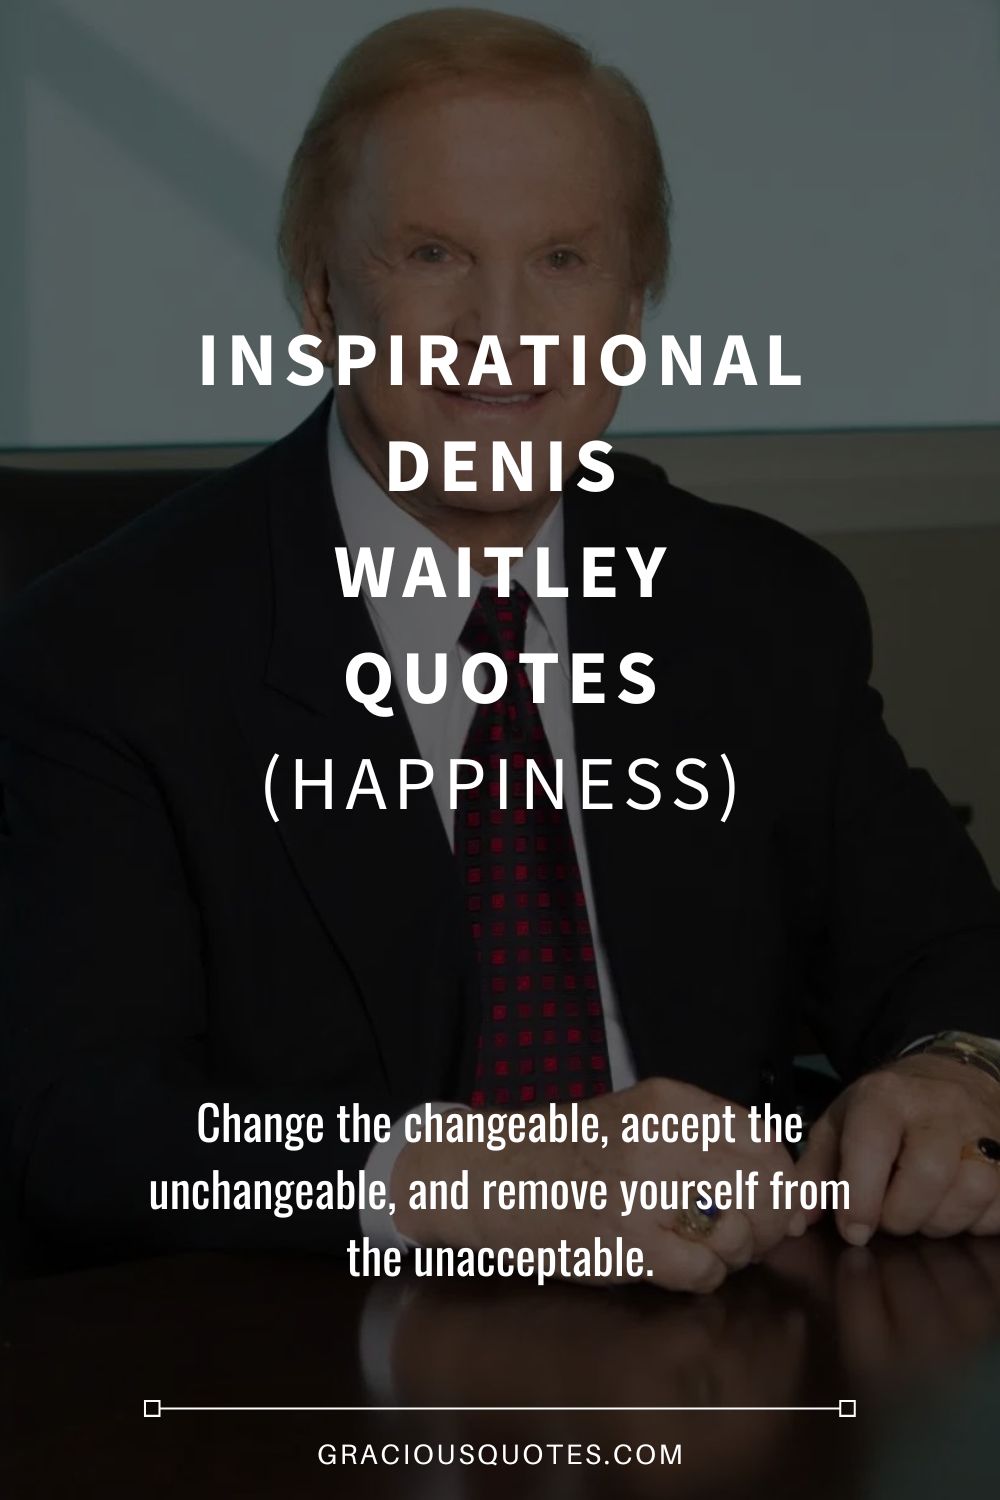 Inspirational Denis Waitley Quotes (HAPPINESS) - Gracious Quotes